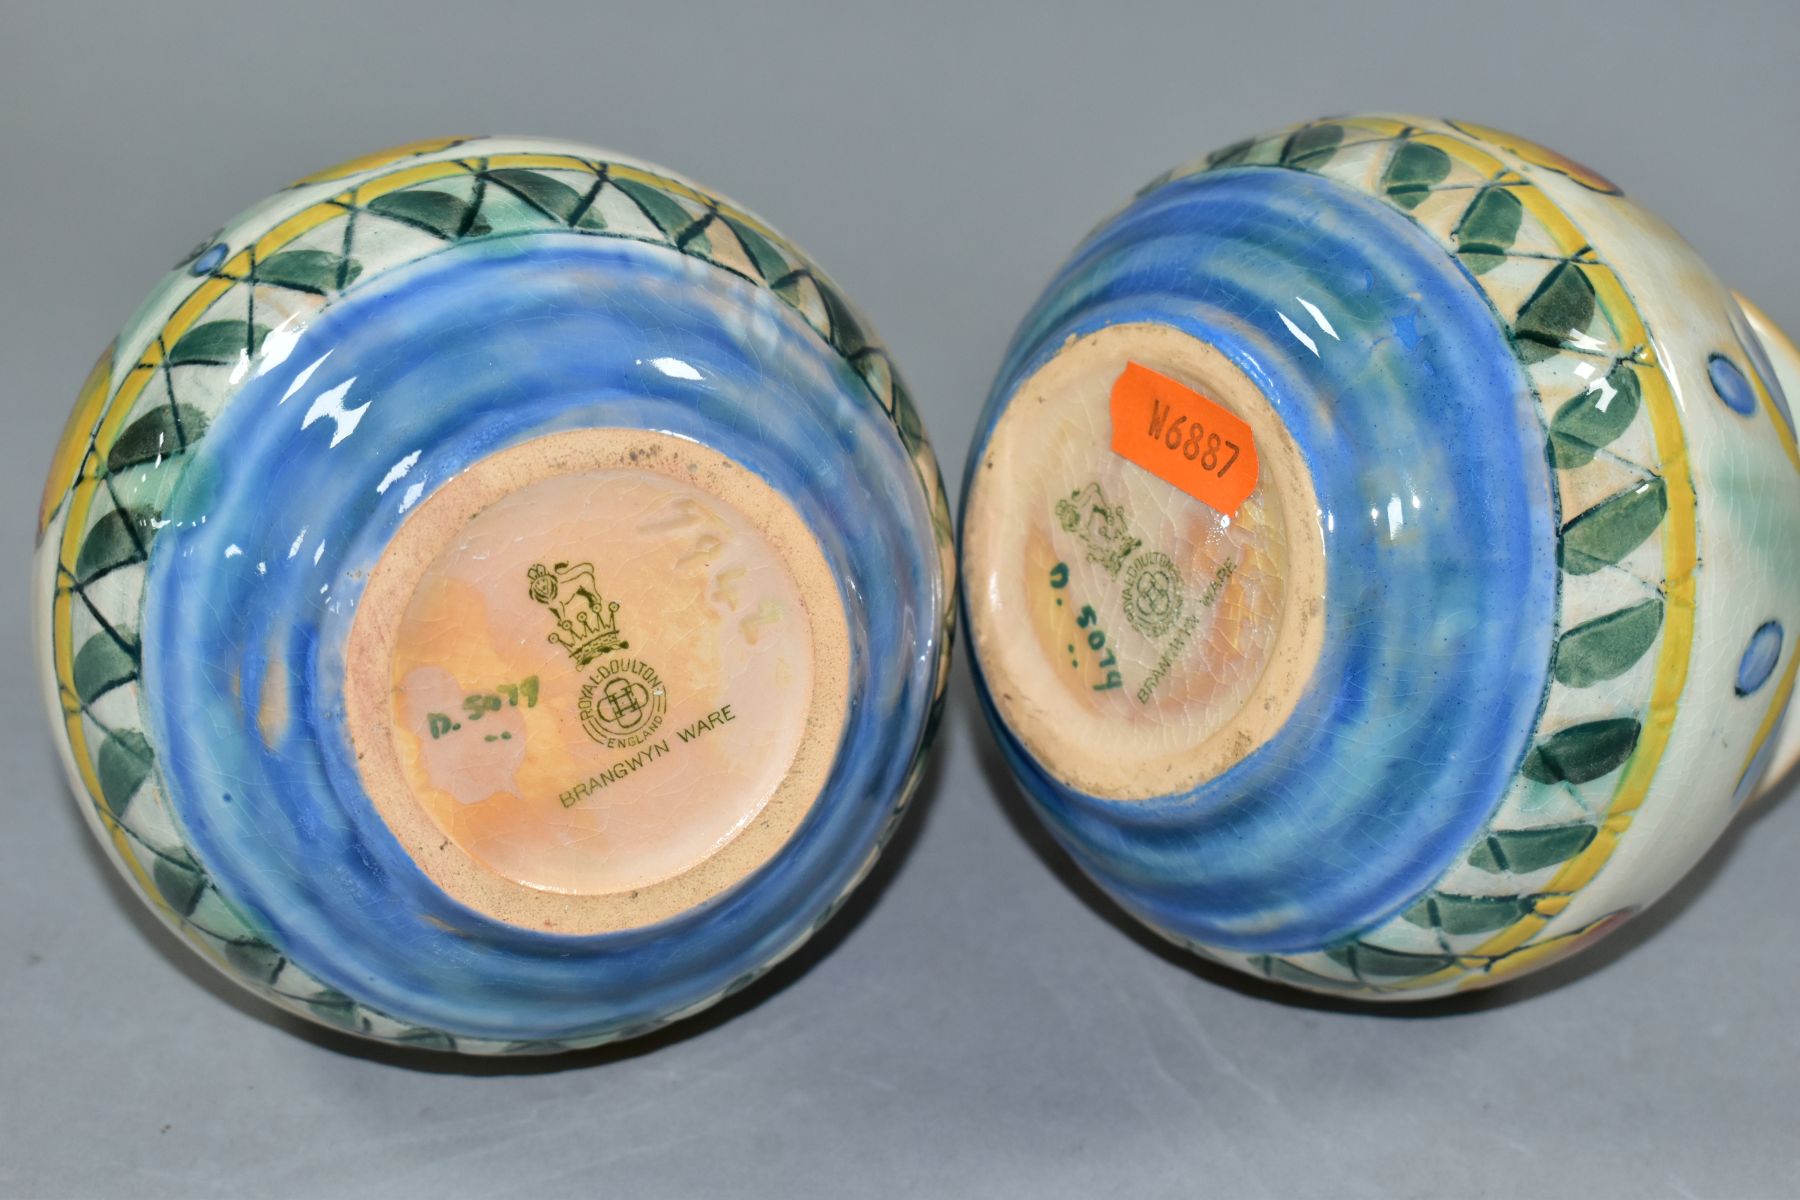 TWO ROYAL DOULTON BRANGWYN WARE VASES D5079, hand painted decoration, transfer printed back - Image 5 of 5